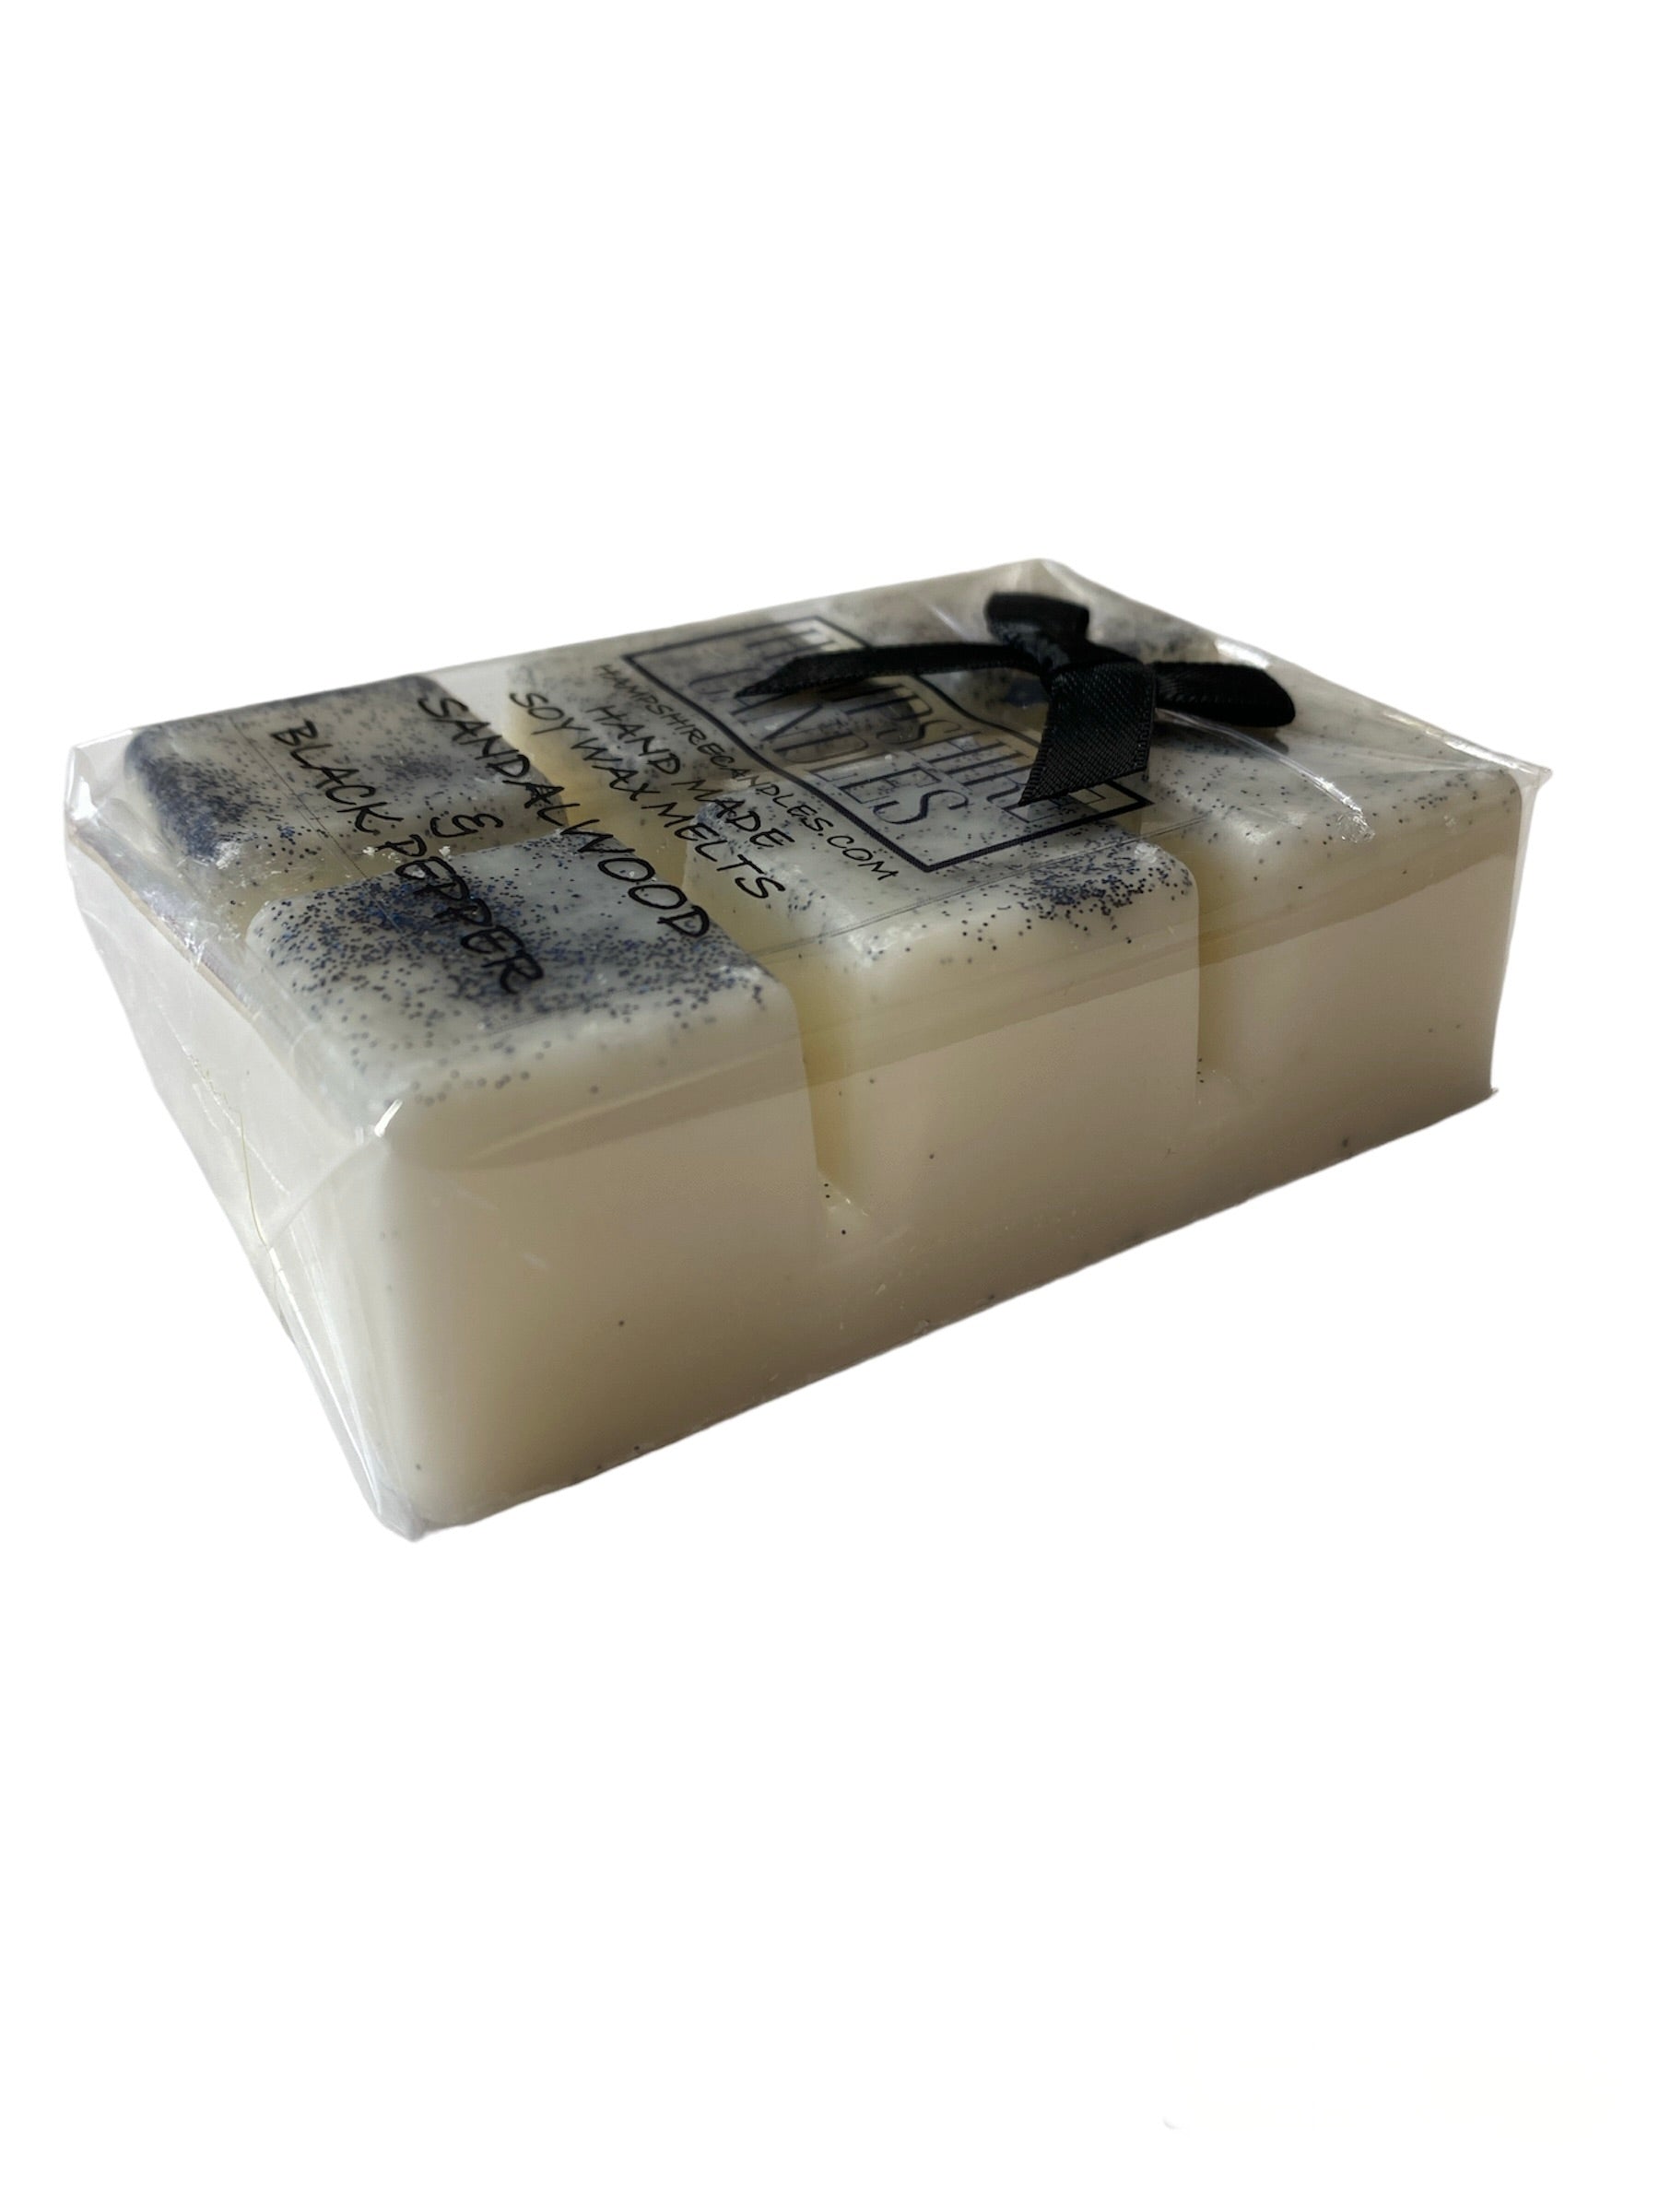 Sandalwood and Black Pepper Wax Melts-FREE Shipping over £30.00-